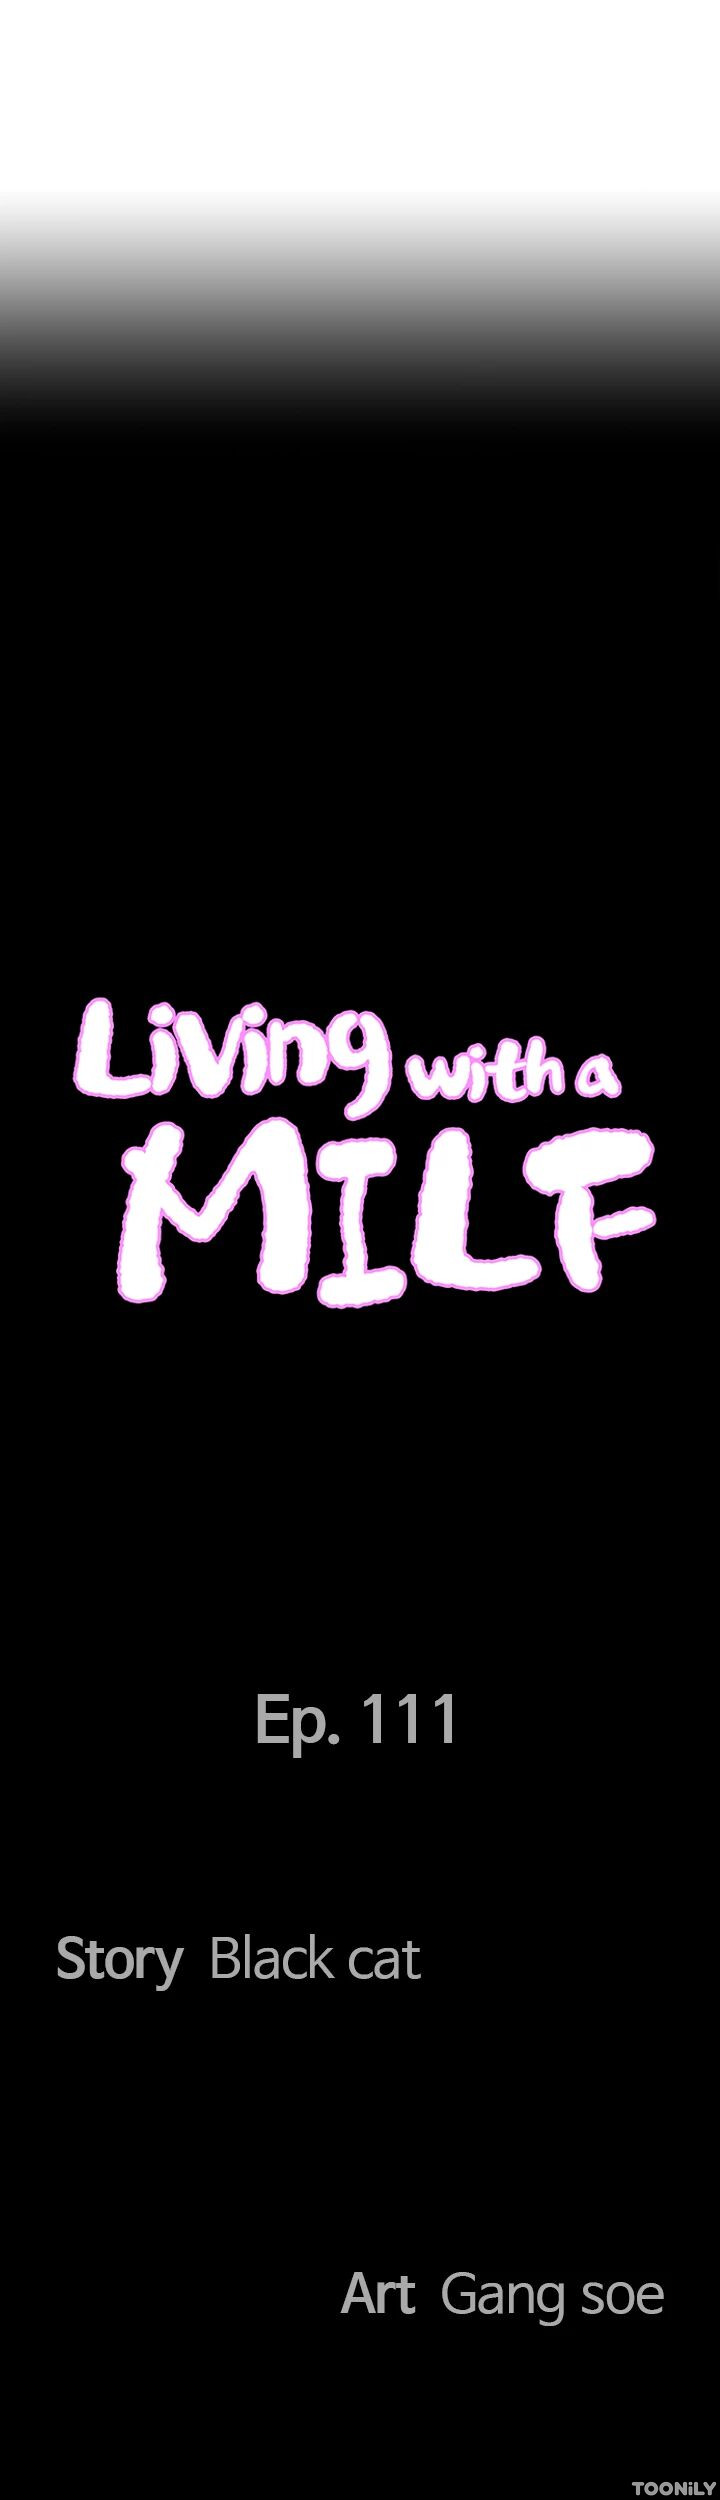 Living with a MILF image